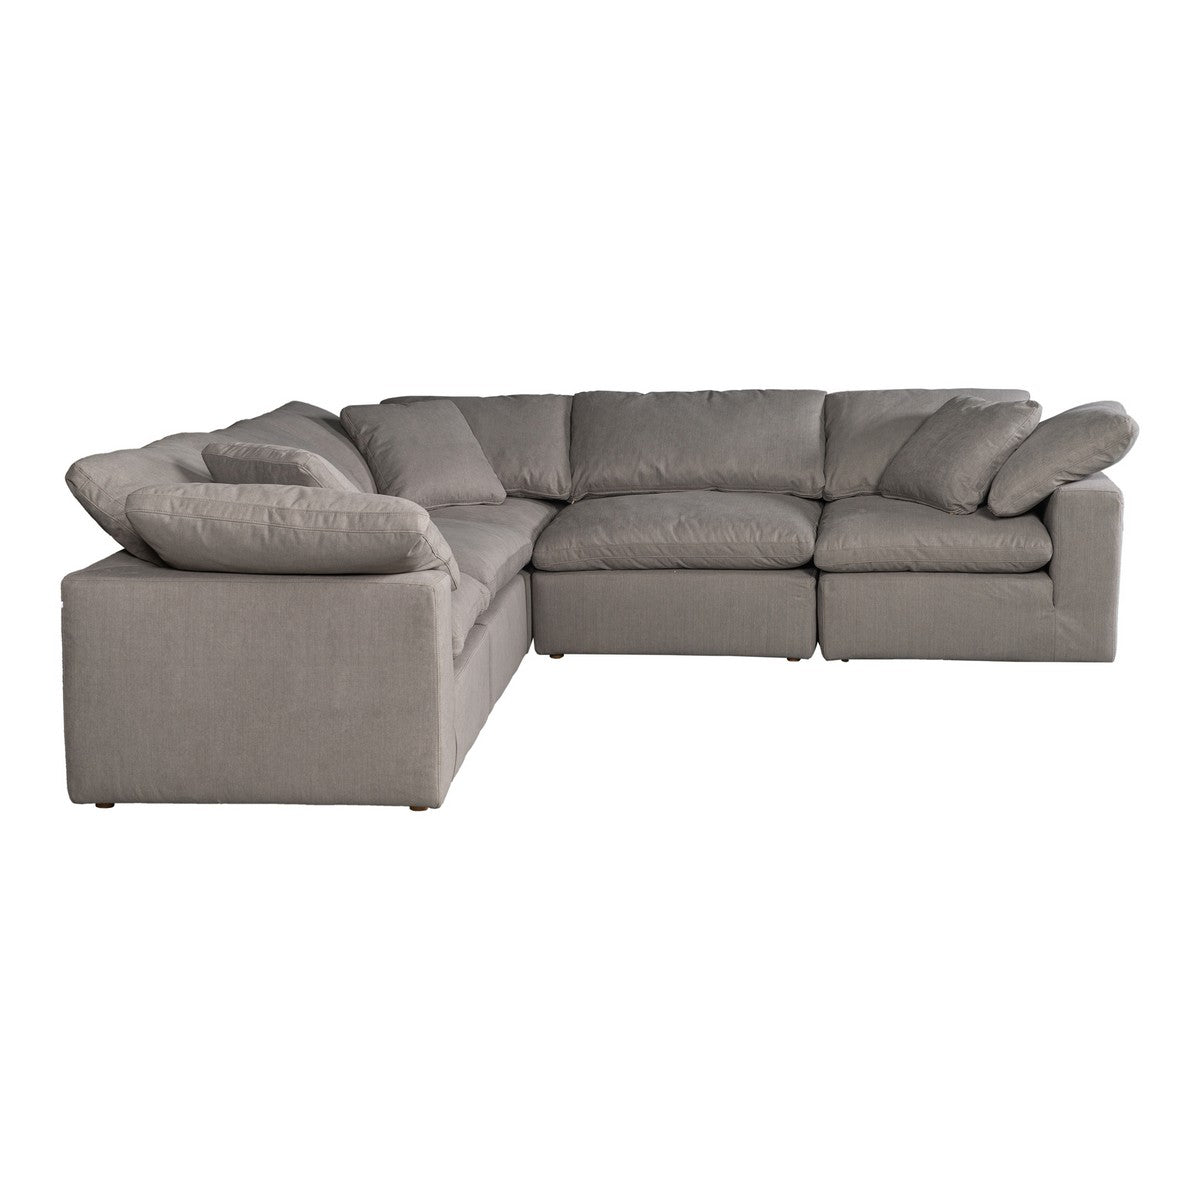 Moe's Home Collection Clay Classic L Modular Sectional Livesmart Fabric Light Grey - YJ-1010-29